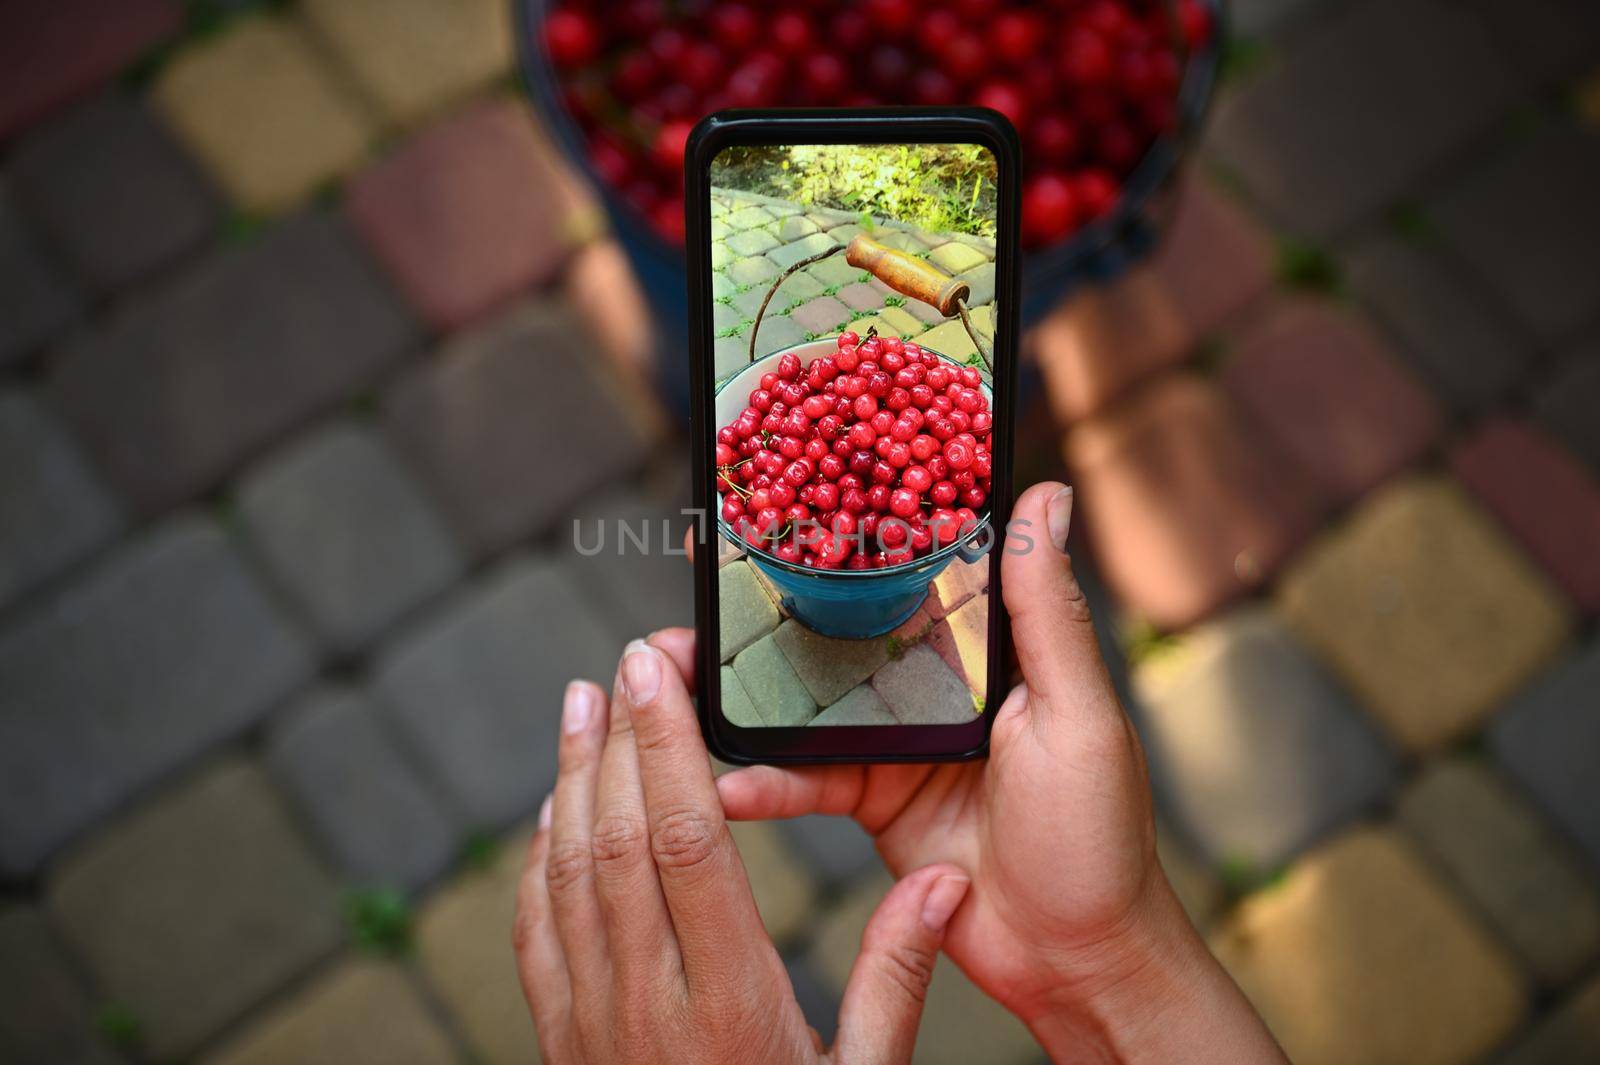 Mobile phone in live view. Smartphone in female hands photographing the harvest of cherries in a blue metal bucket by artgf